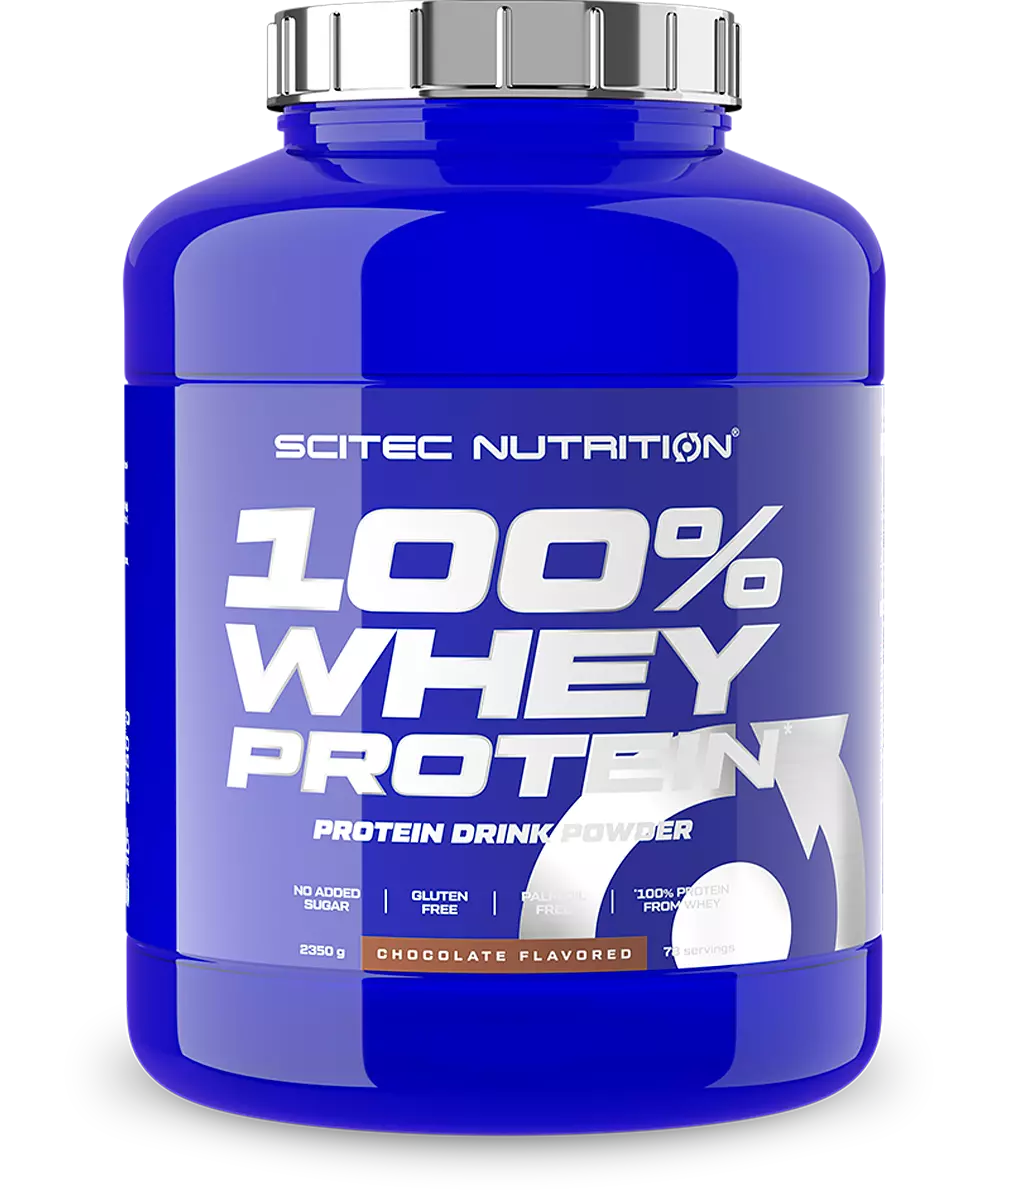 SCITEC NUTRITION 100% Whey Protein (2,35 kg)